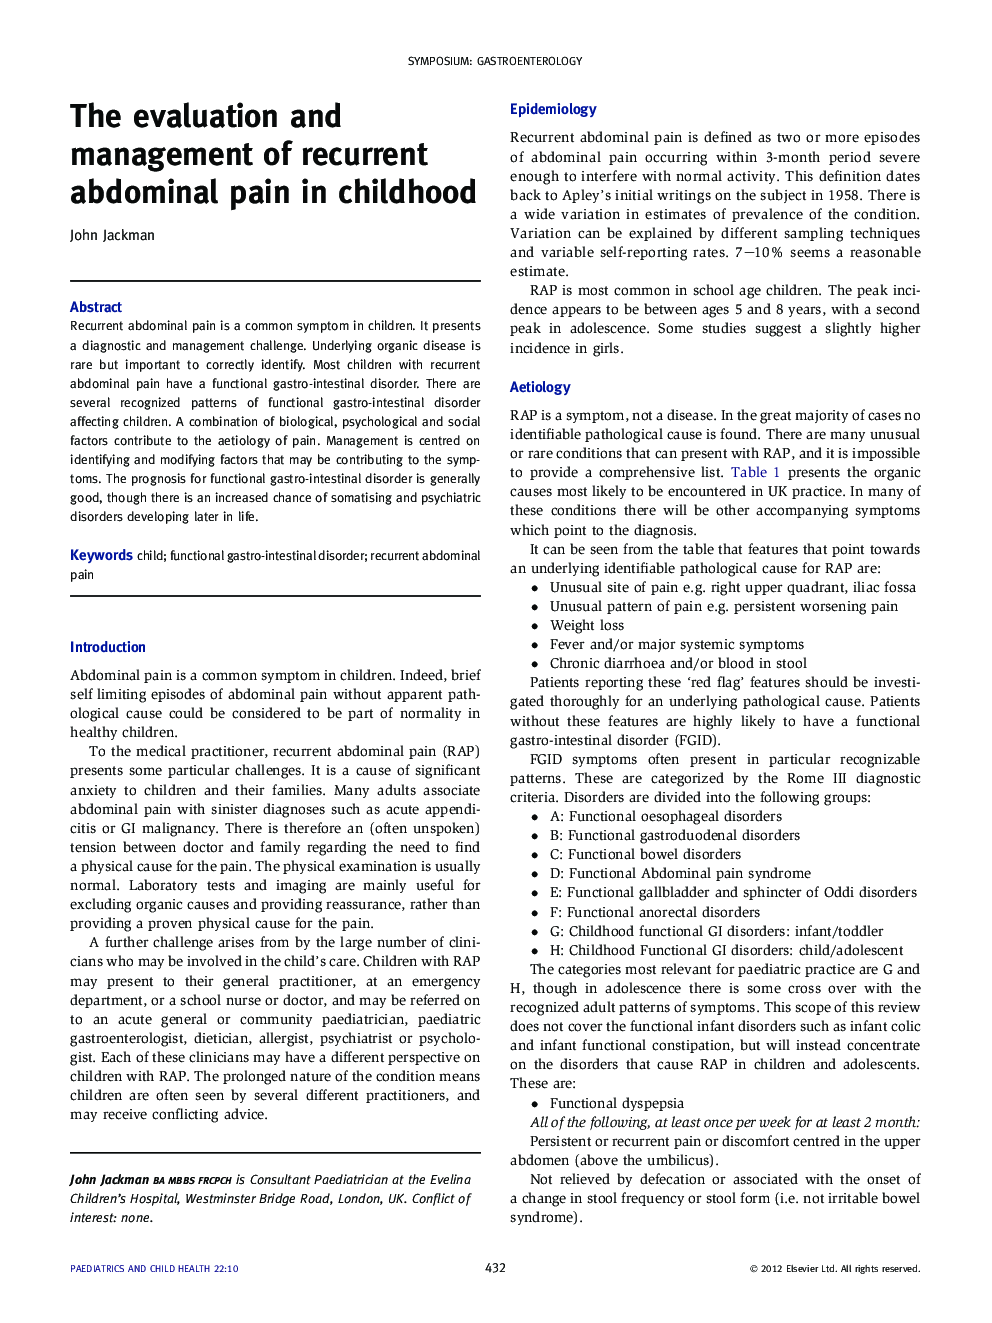 The evaluation and management of recurrent abdominal pain in childhood